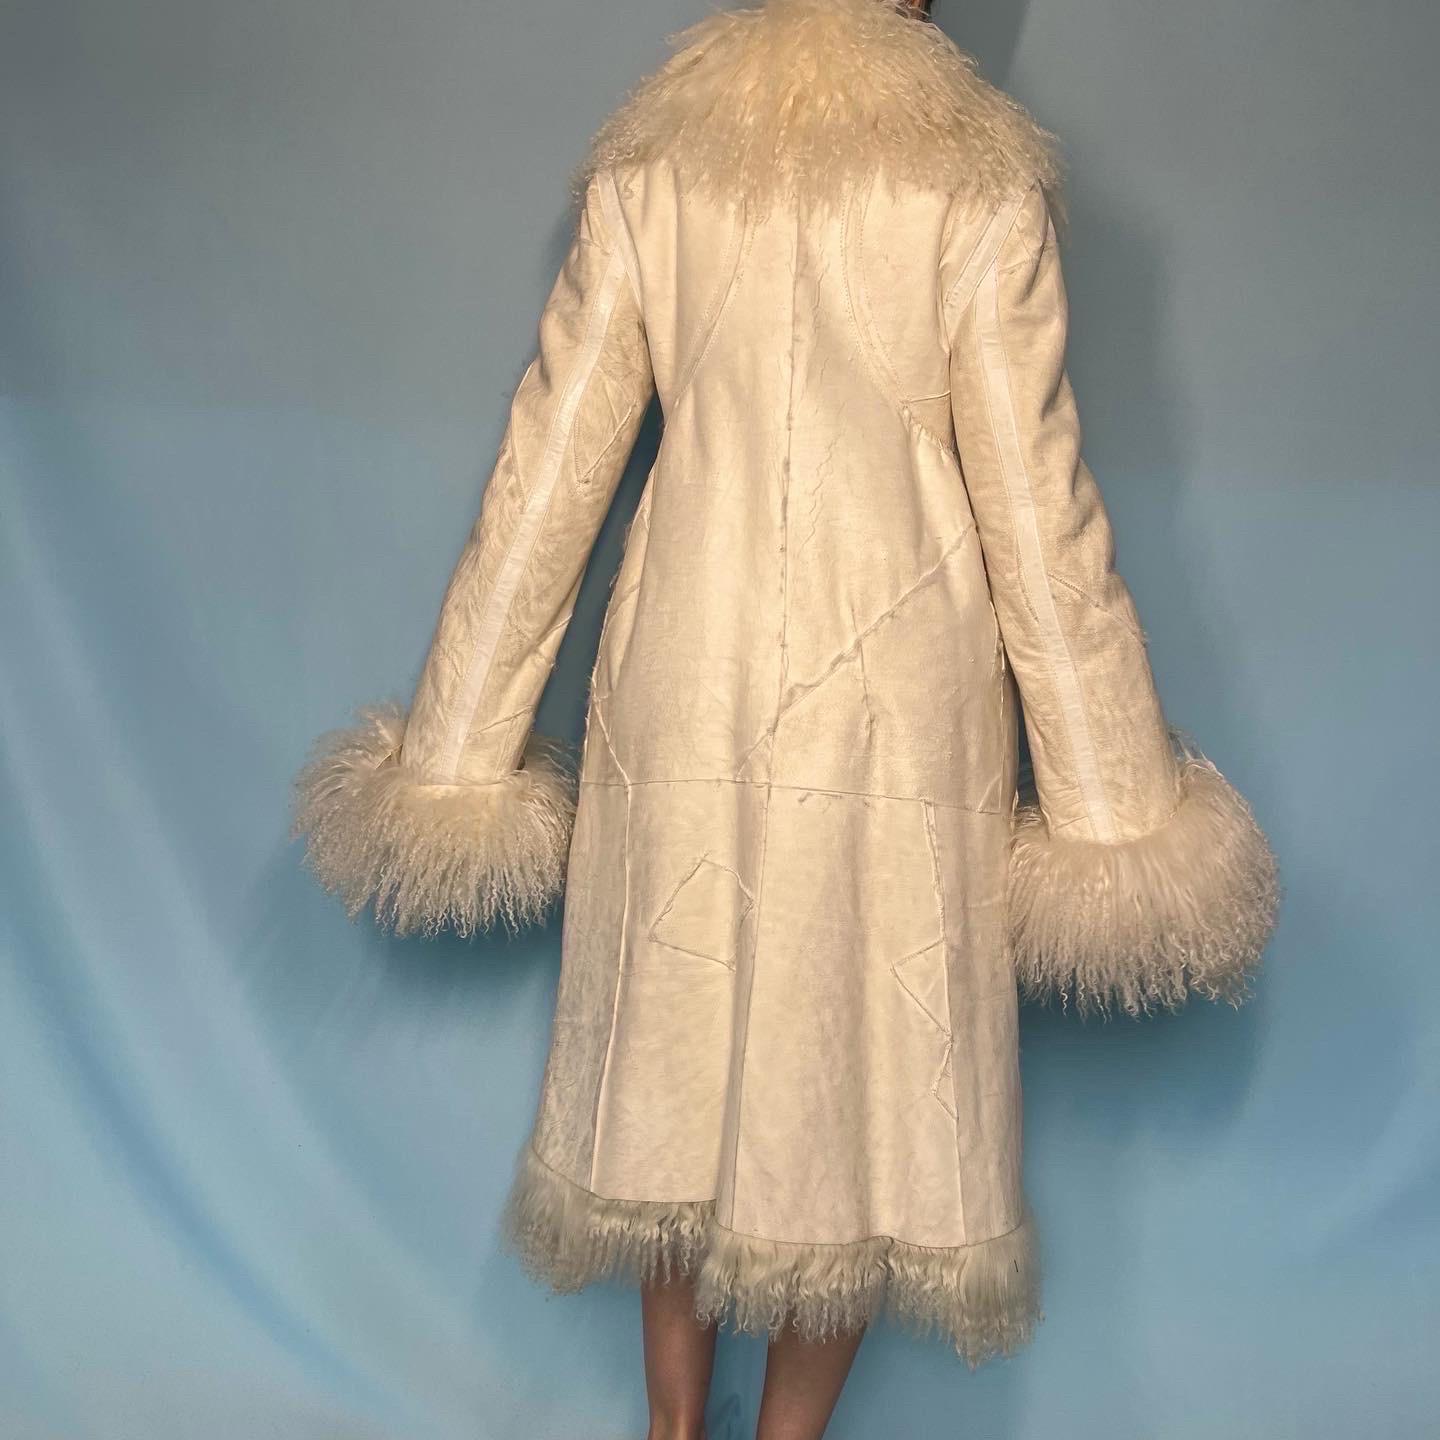 Alexander McQueen  

Fall 2003 “Scanners” Runway show piece - this jacket is the exact one that was worn by the model on the runway 

White suede patchwork detail jacket 

Mongolian lamb fur lined 

Large fur collar

Zip up 

Cuffs can be folded up